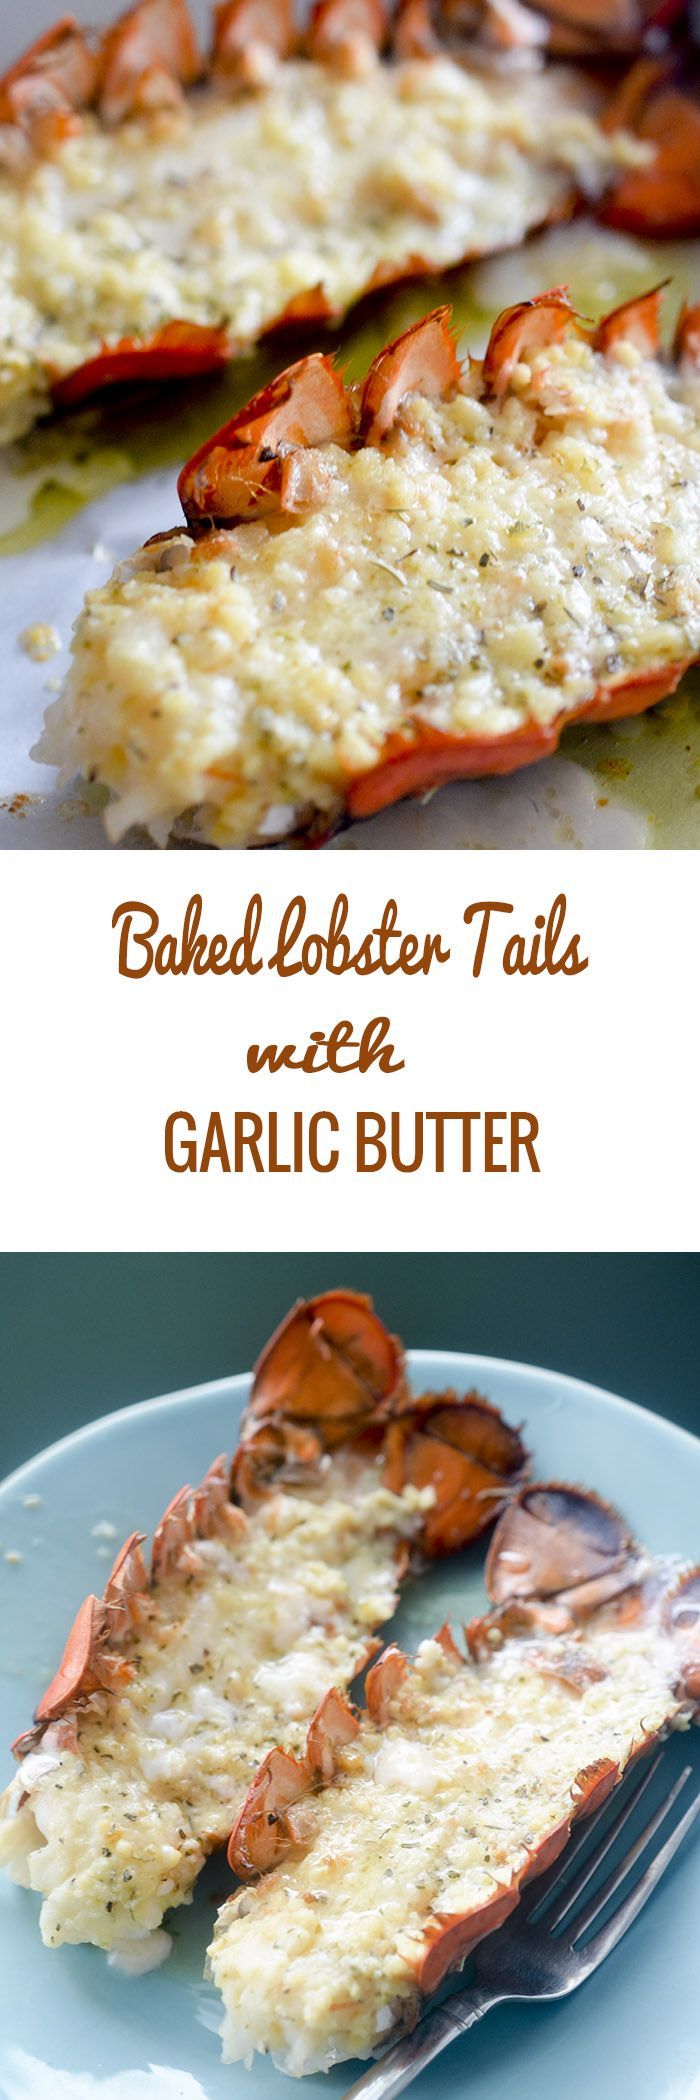 Baked Lobster Tails with Garlic Butter #seafood – Recipe Diaries